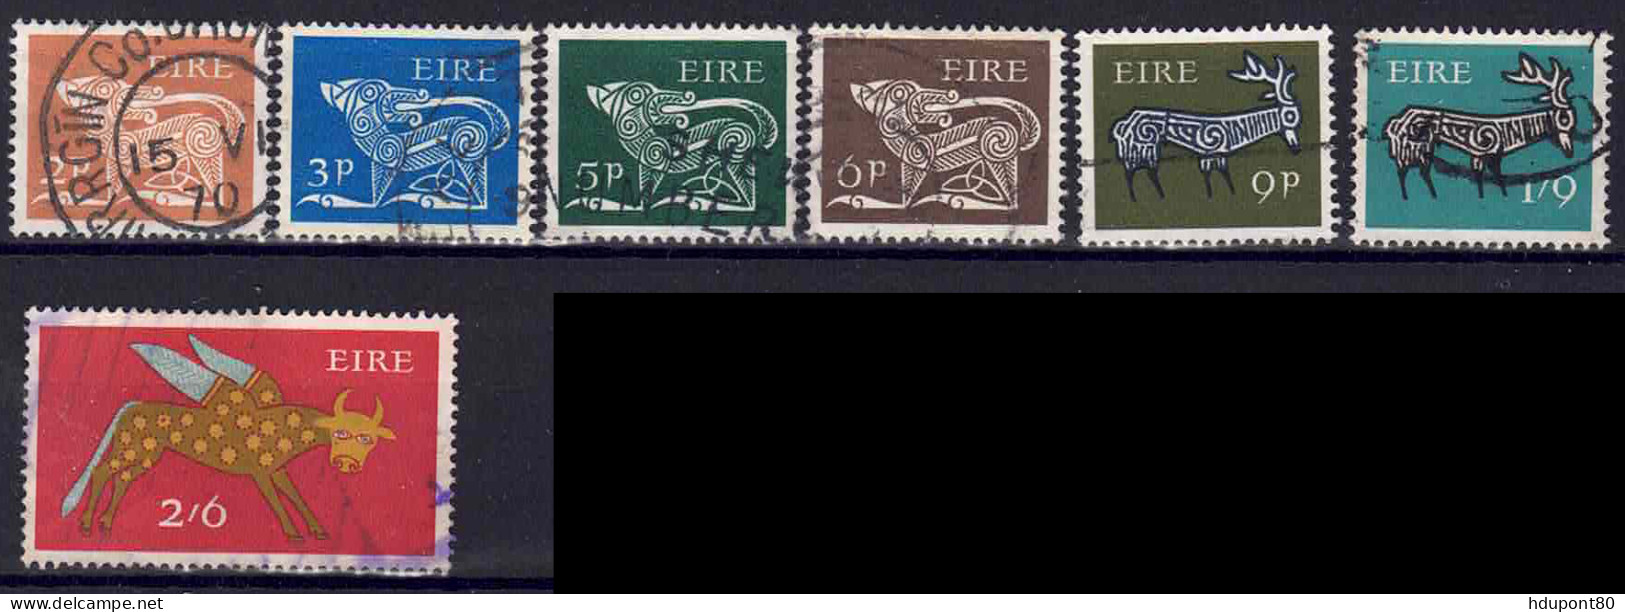 YT  213, 214, 216, 217, 220, 223, 224 - Used Stamps